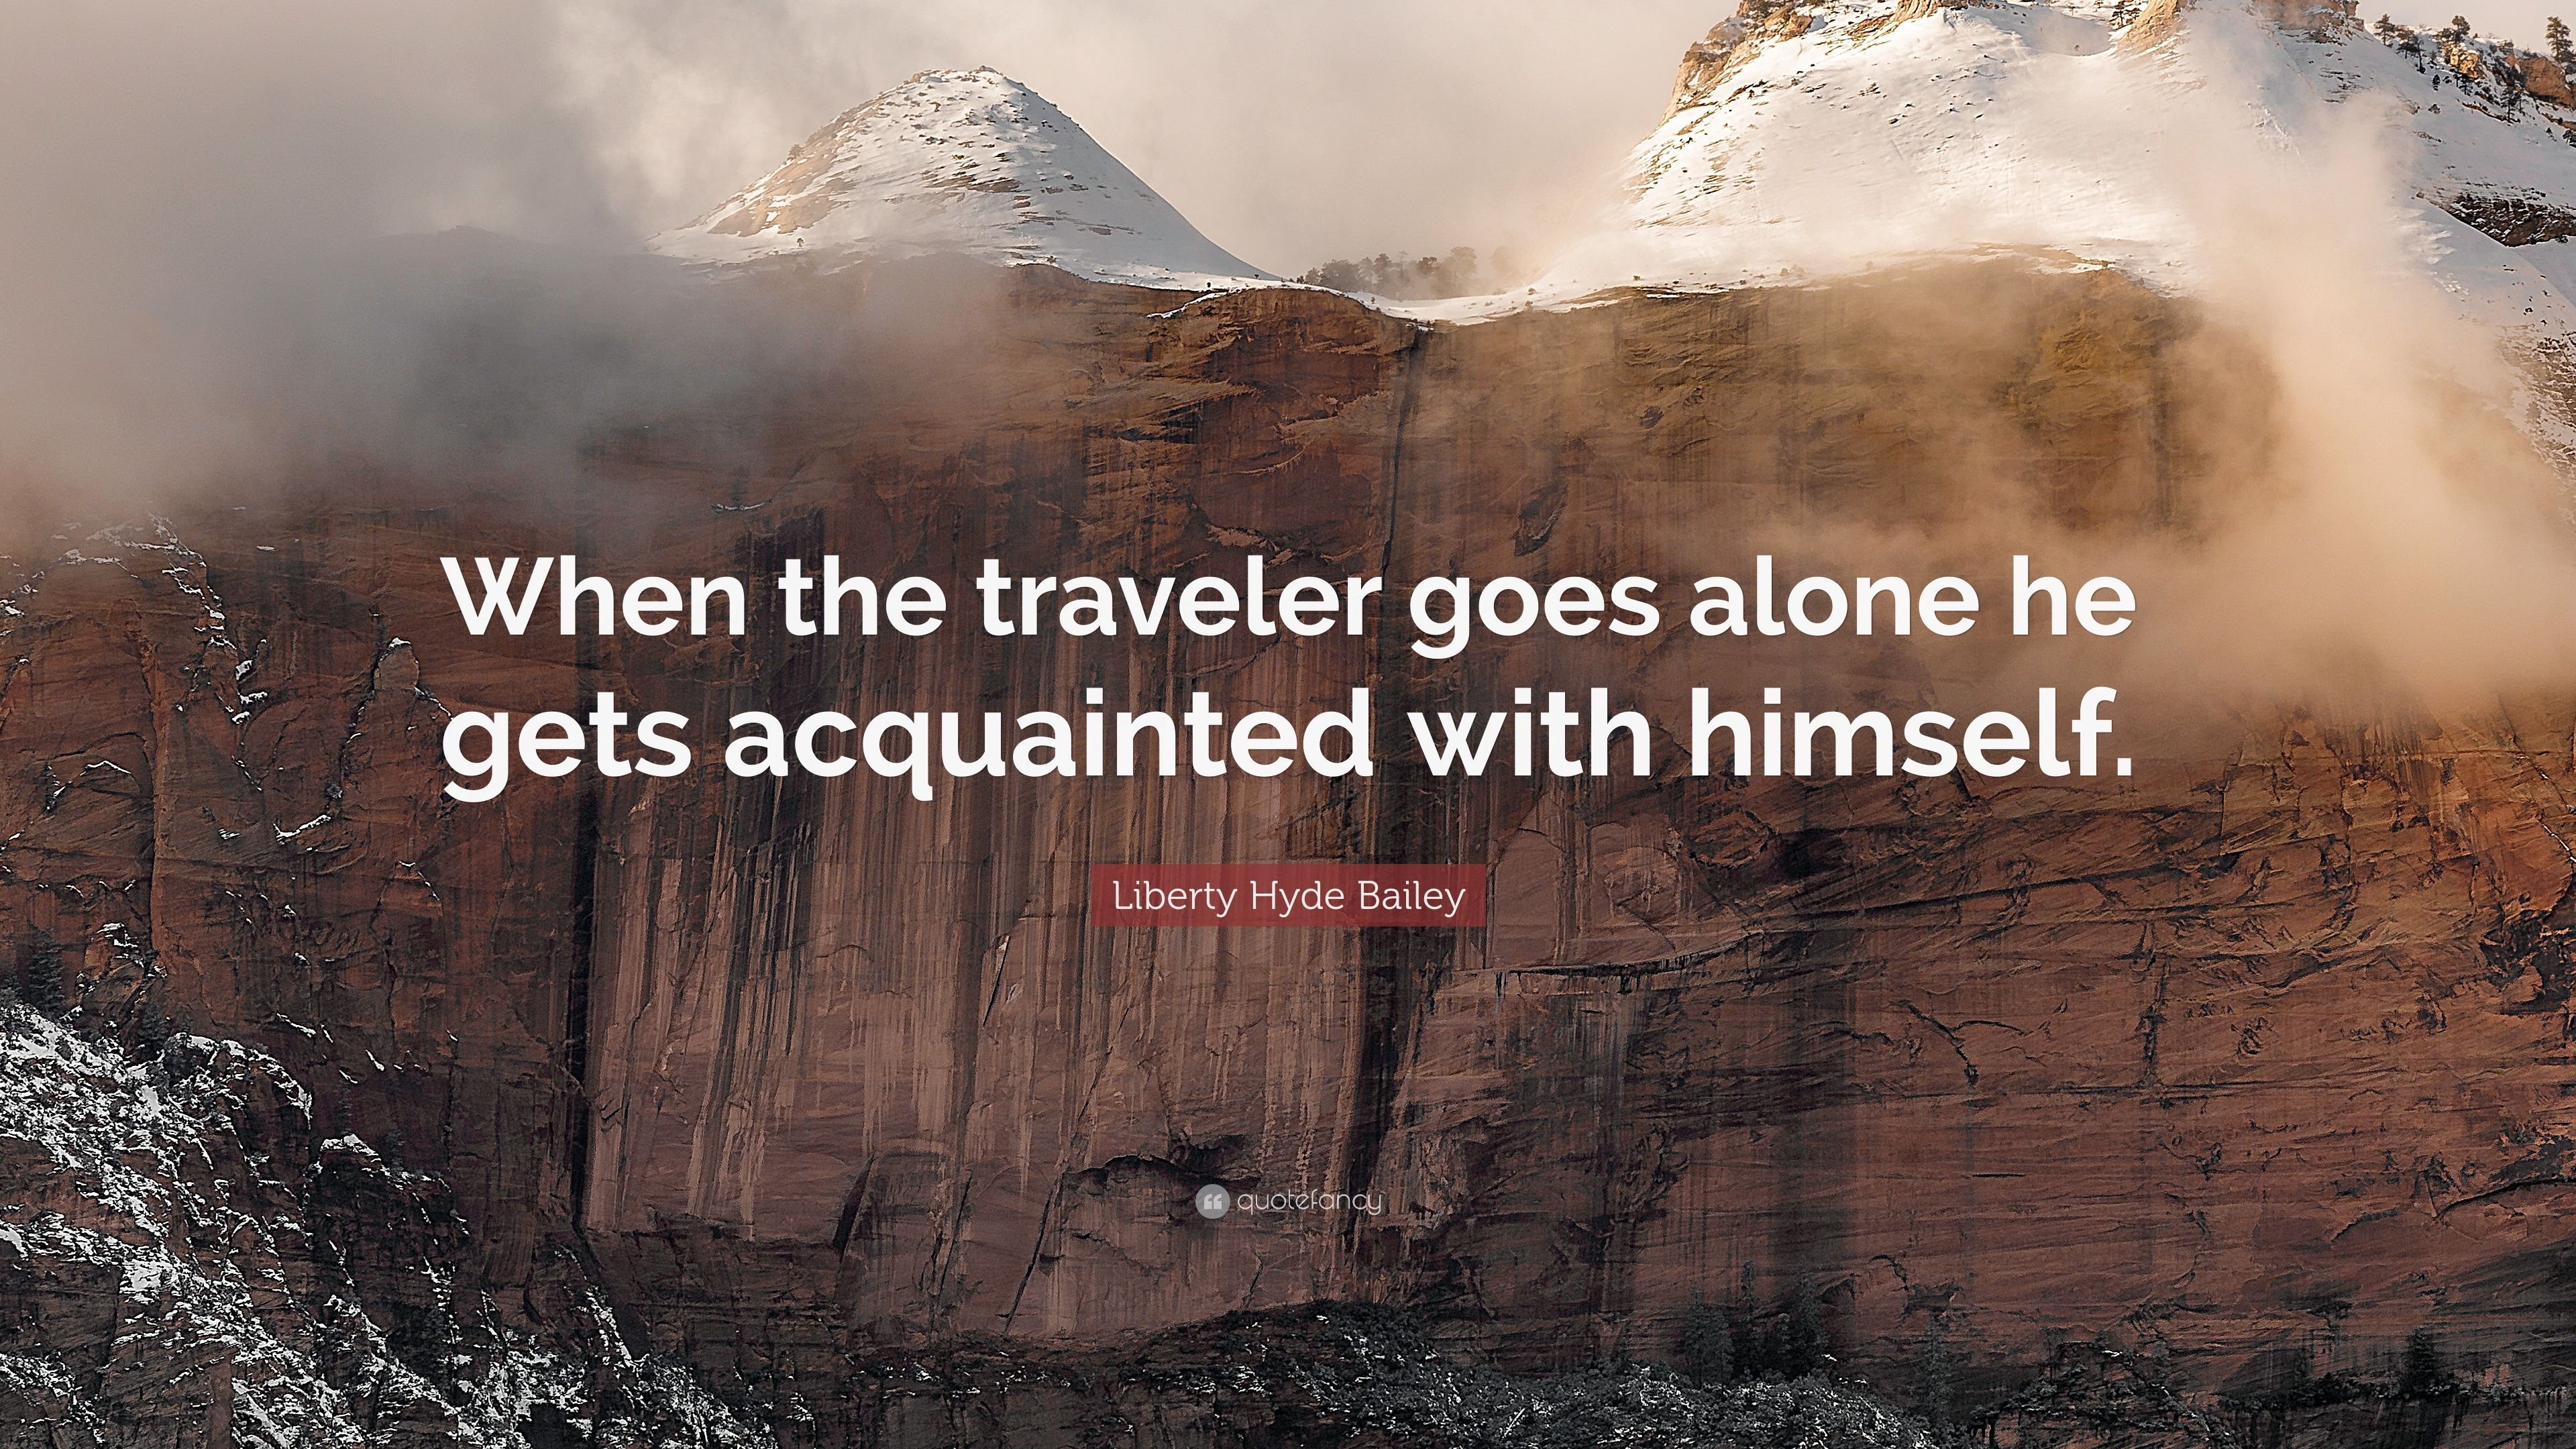 Liberty Hyde Bailey Quote: “When the traveler goes alone he gets